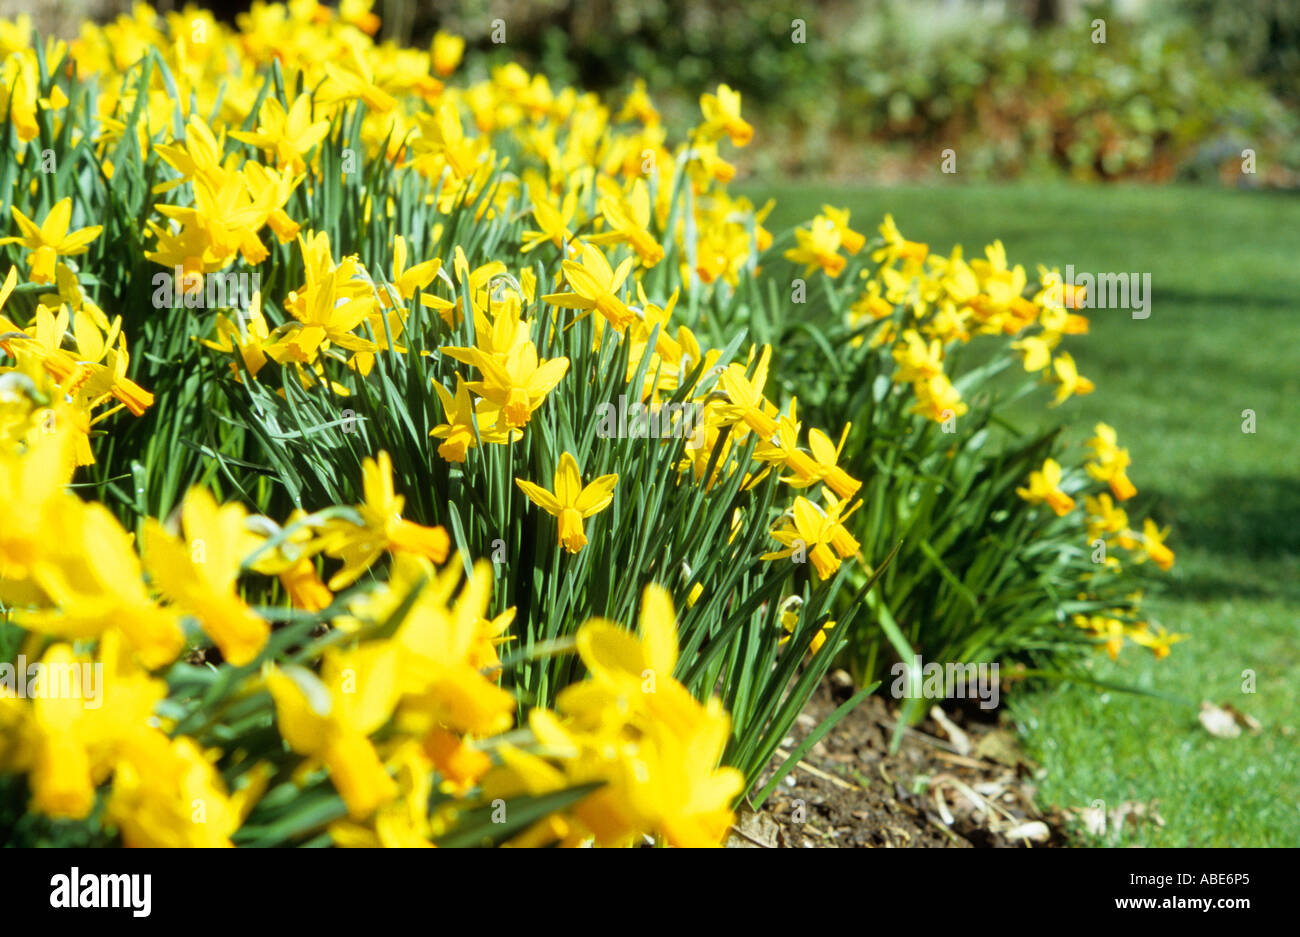 Spring yellow daffodils growing in a flower bed Stock Photo